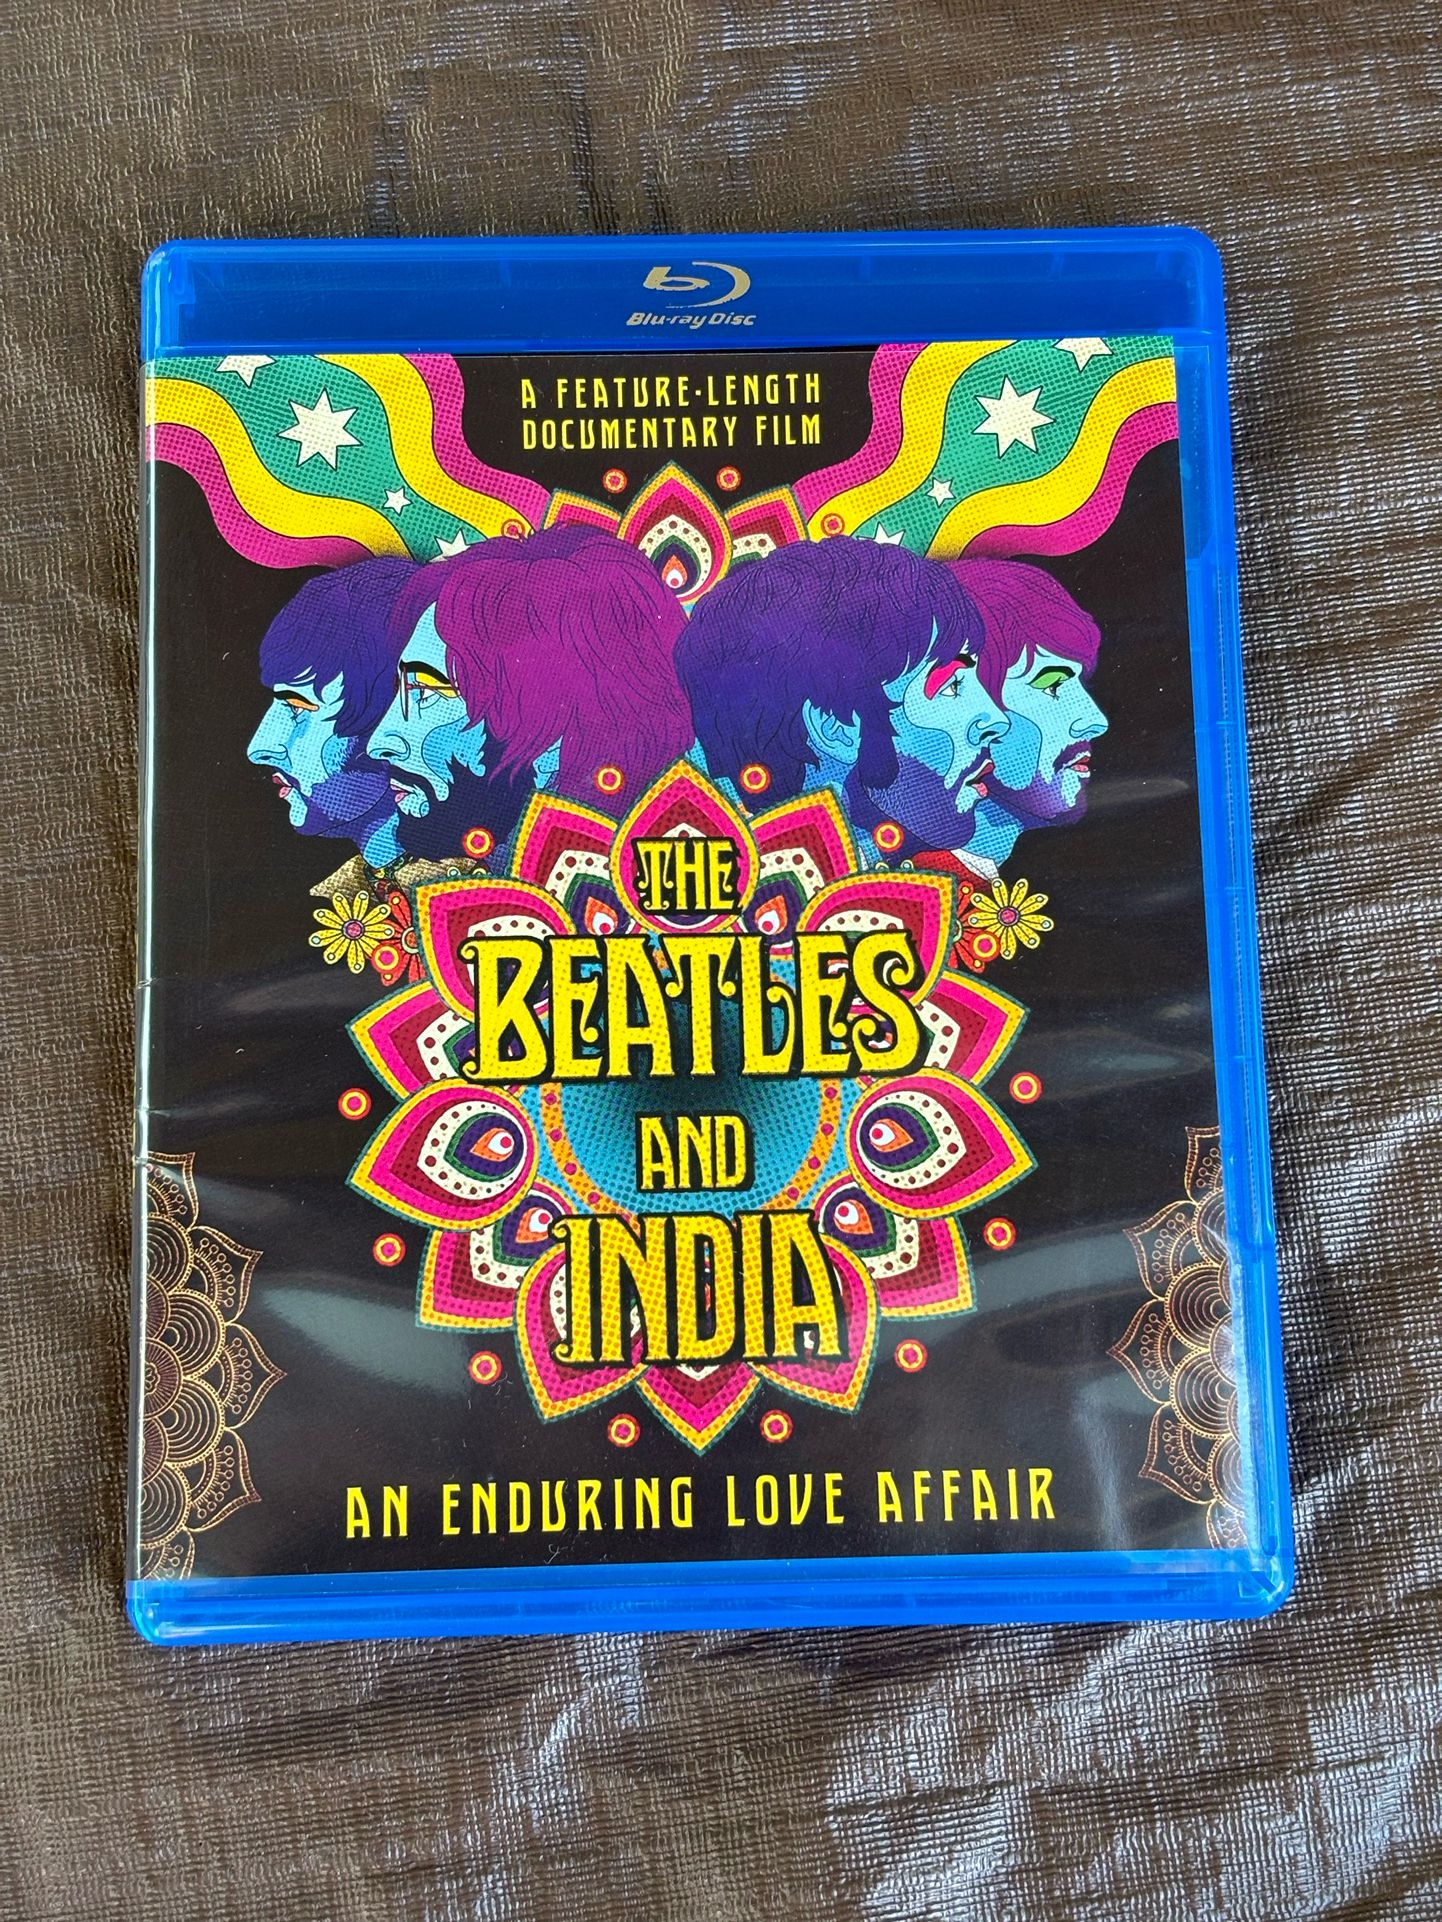 The Beatles and India an enduring love affair